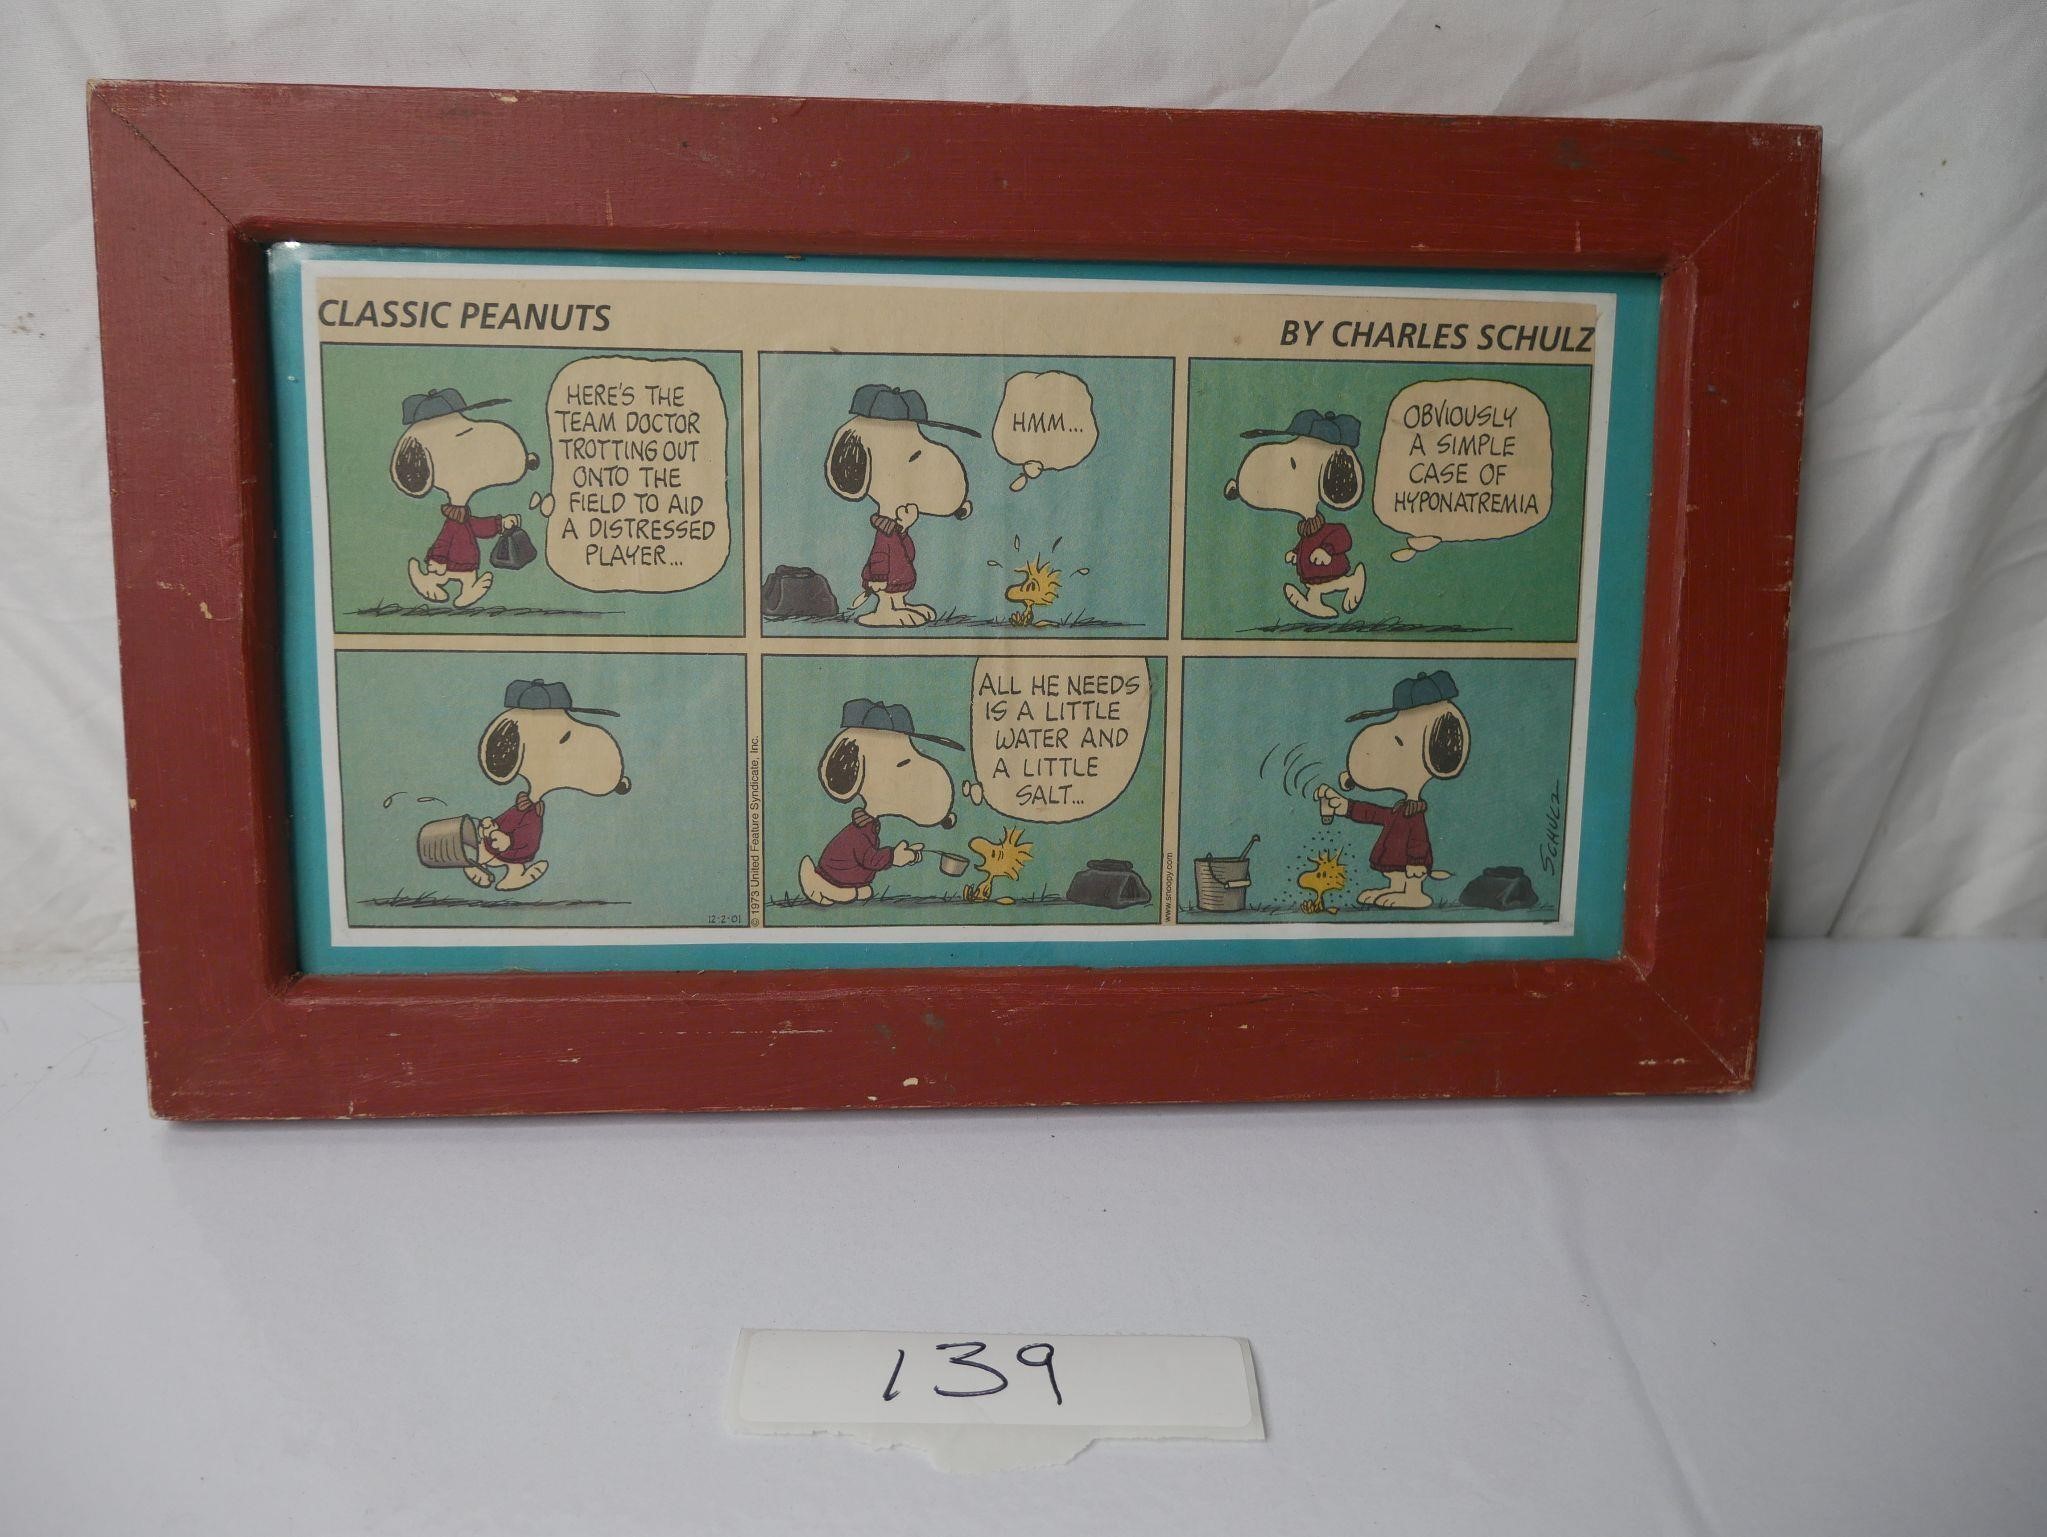 Framed peanuts comic by Charles Schulz 1973